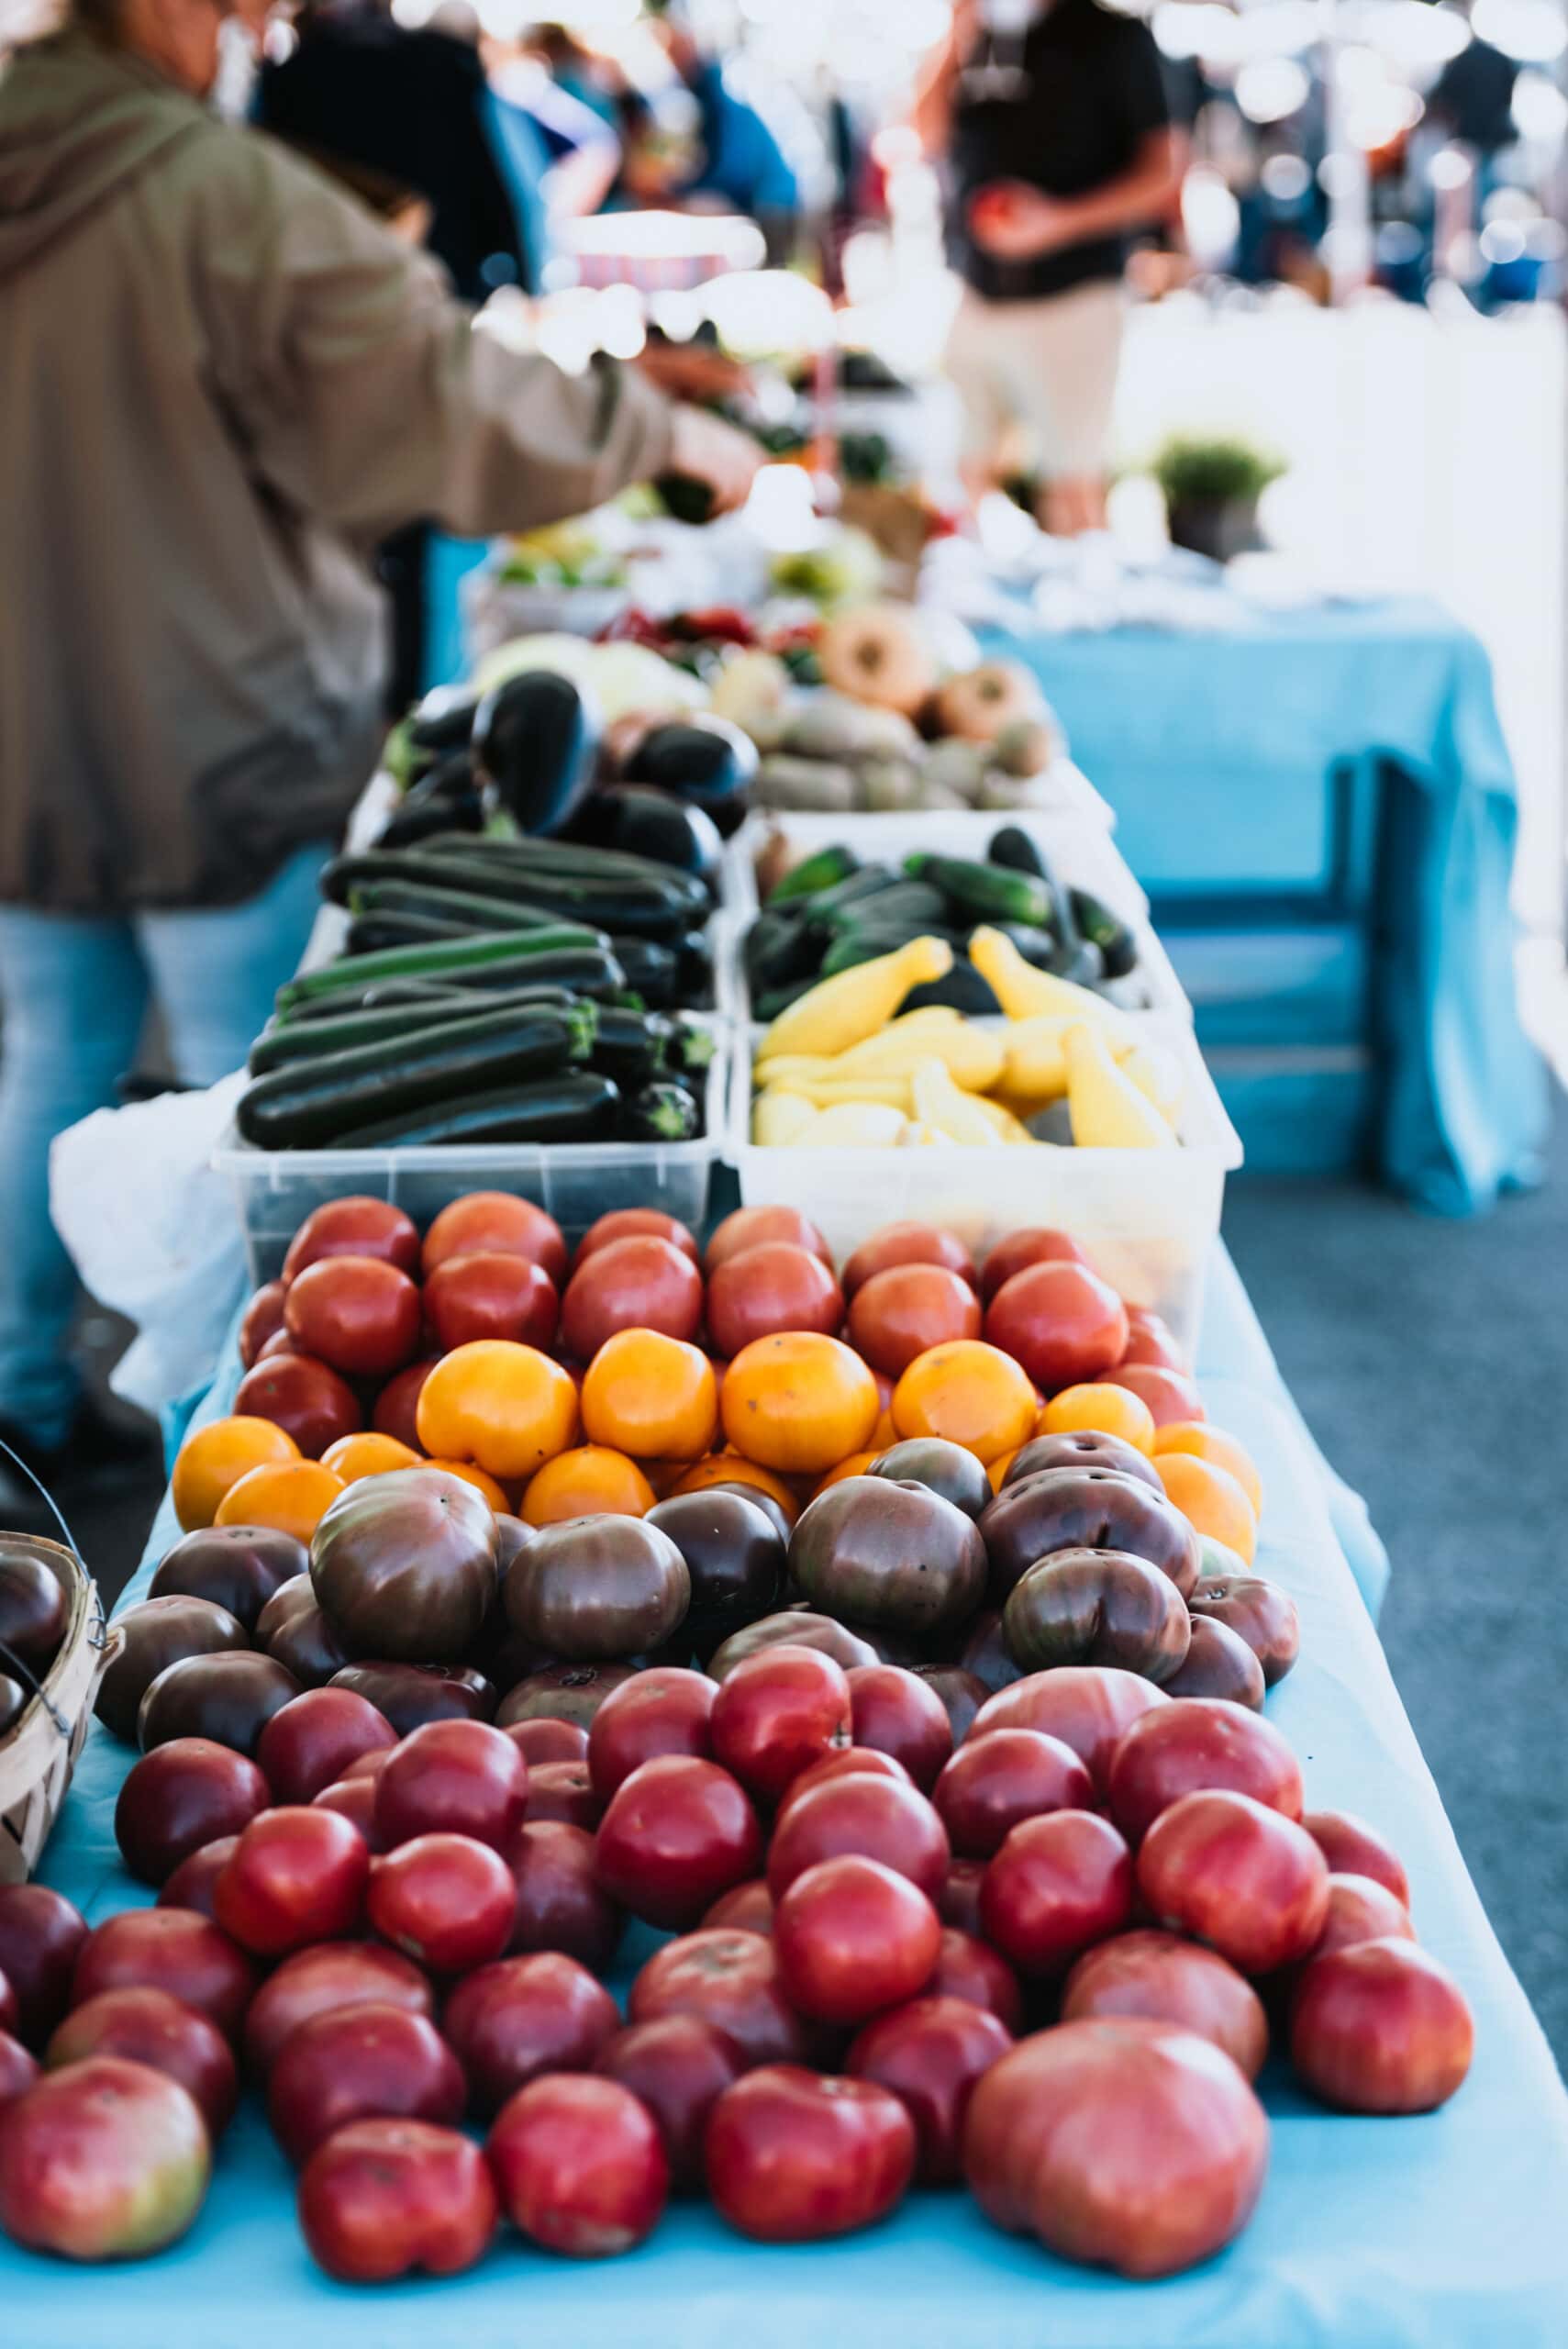 Franklin Farmers Market at The Factory at Franklin in Franklin, Tennessee. Courtesy of Visit Franklin.